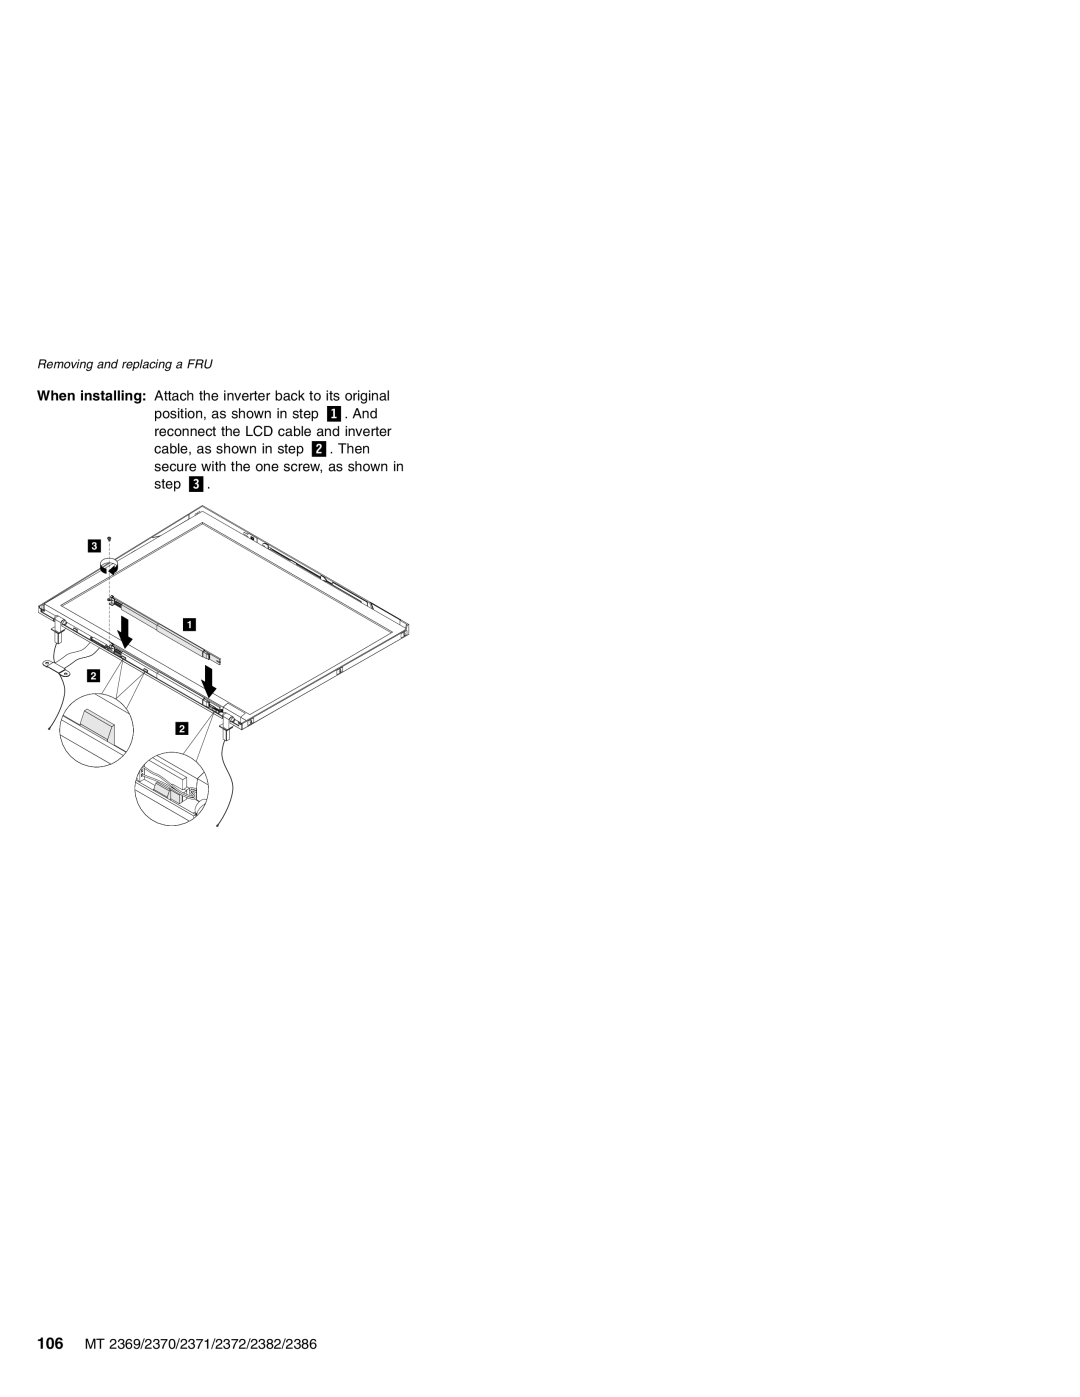 Lenovo MT 2369 manual When installing Attach the inverter back to its original, position, as shown in step, Then 